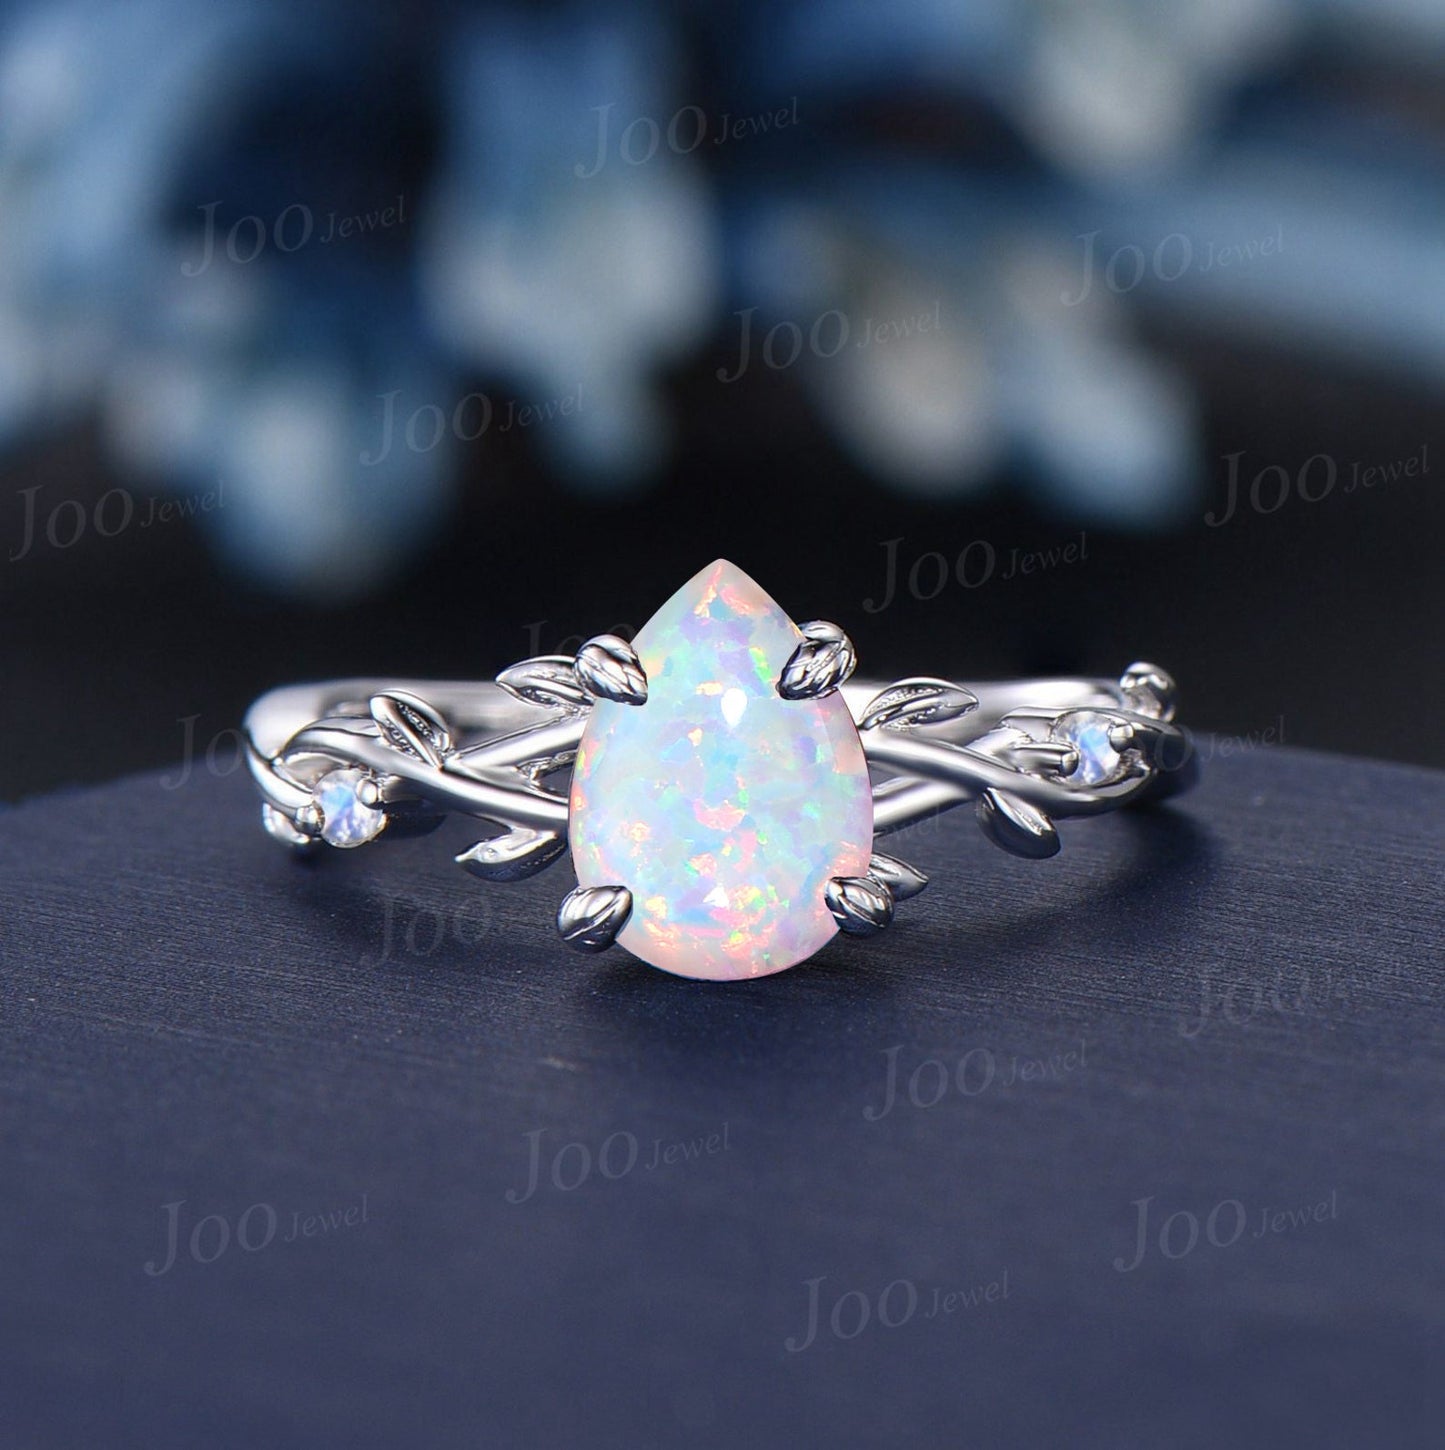 1.25ct Opal Engagement Ring Set Vintage 14K Rose Gold Nature Wedding Ring Twig Vine Pear White Fire Opal Ring Unique October Birthstone Gift